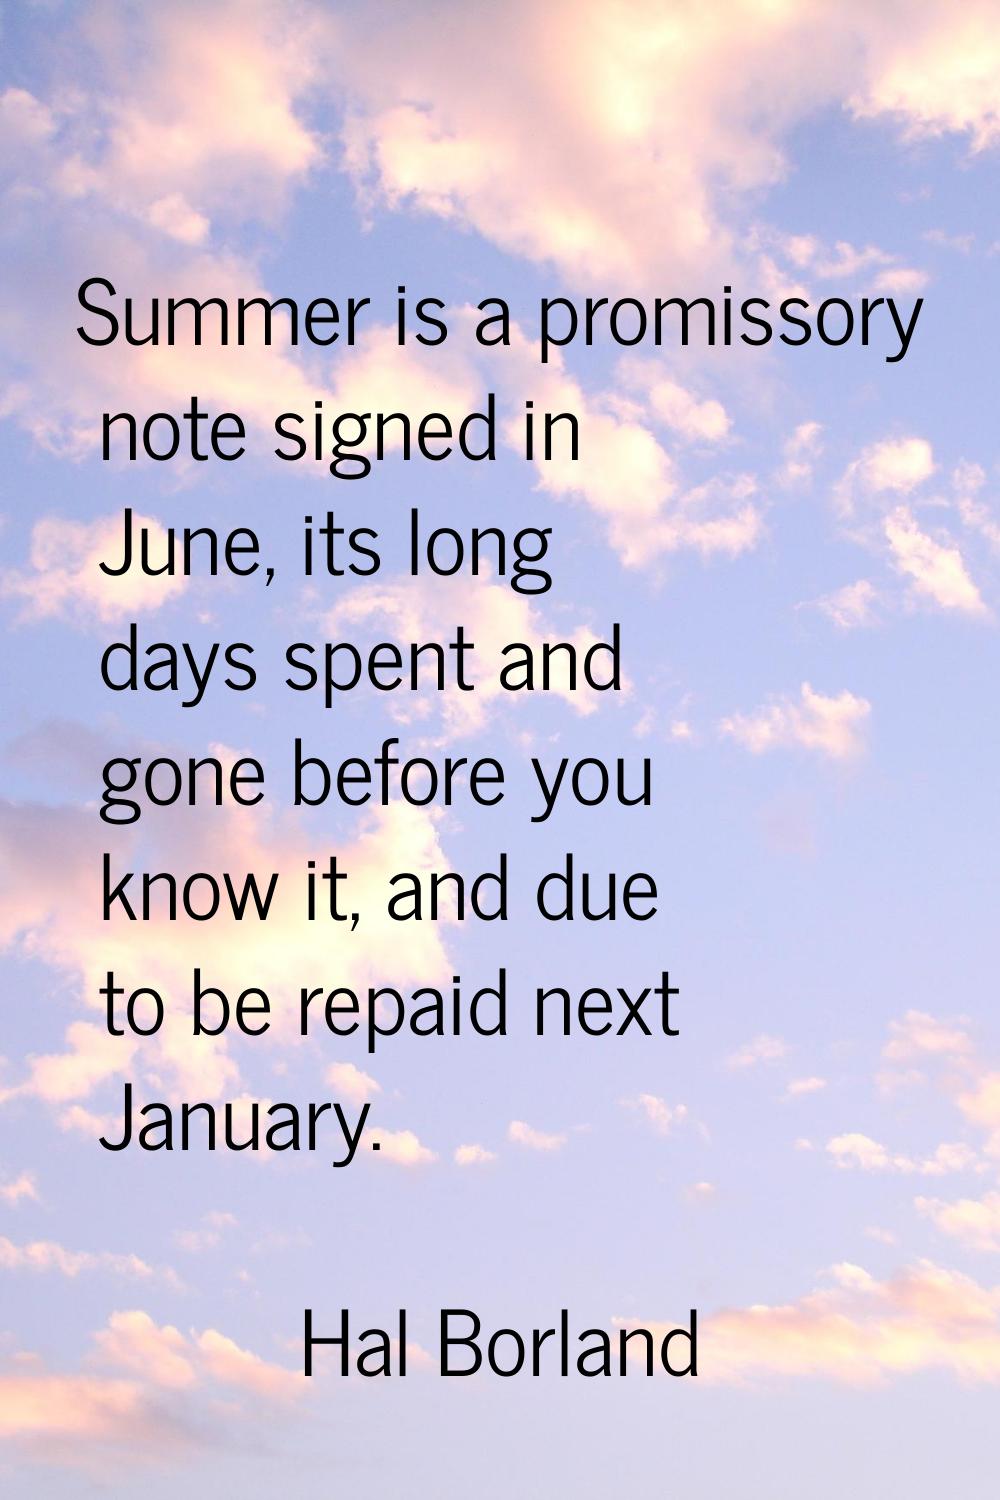 Summer is a promissory note signed in June, its long days spent and gone before you know it, and du